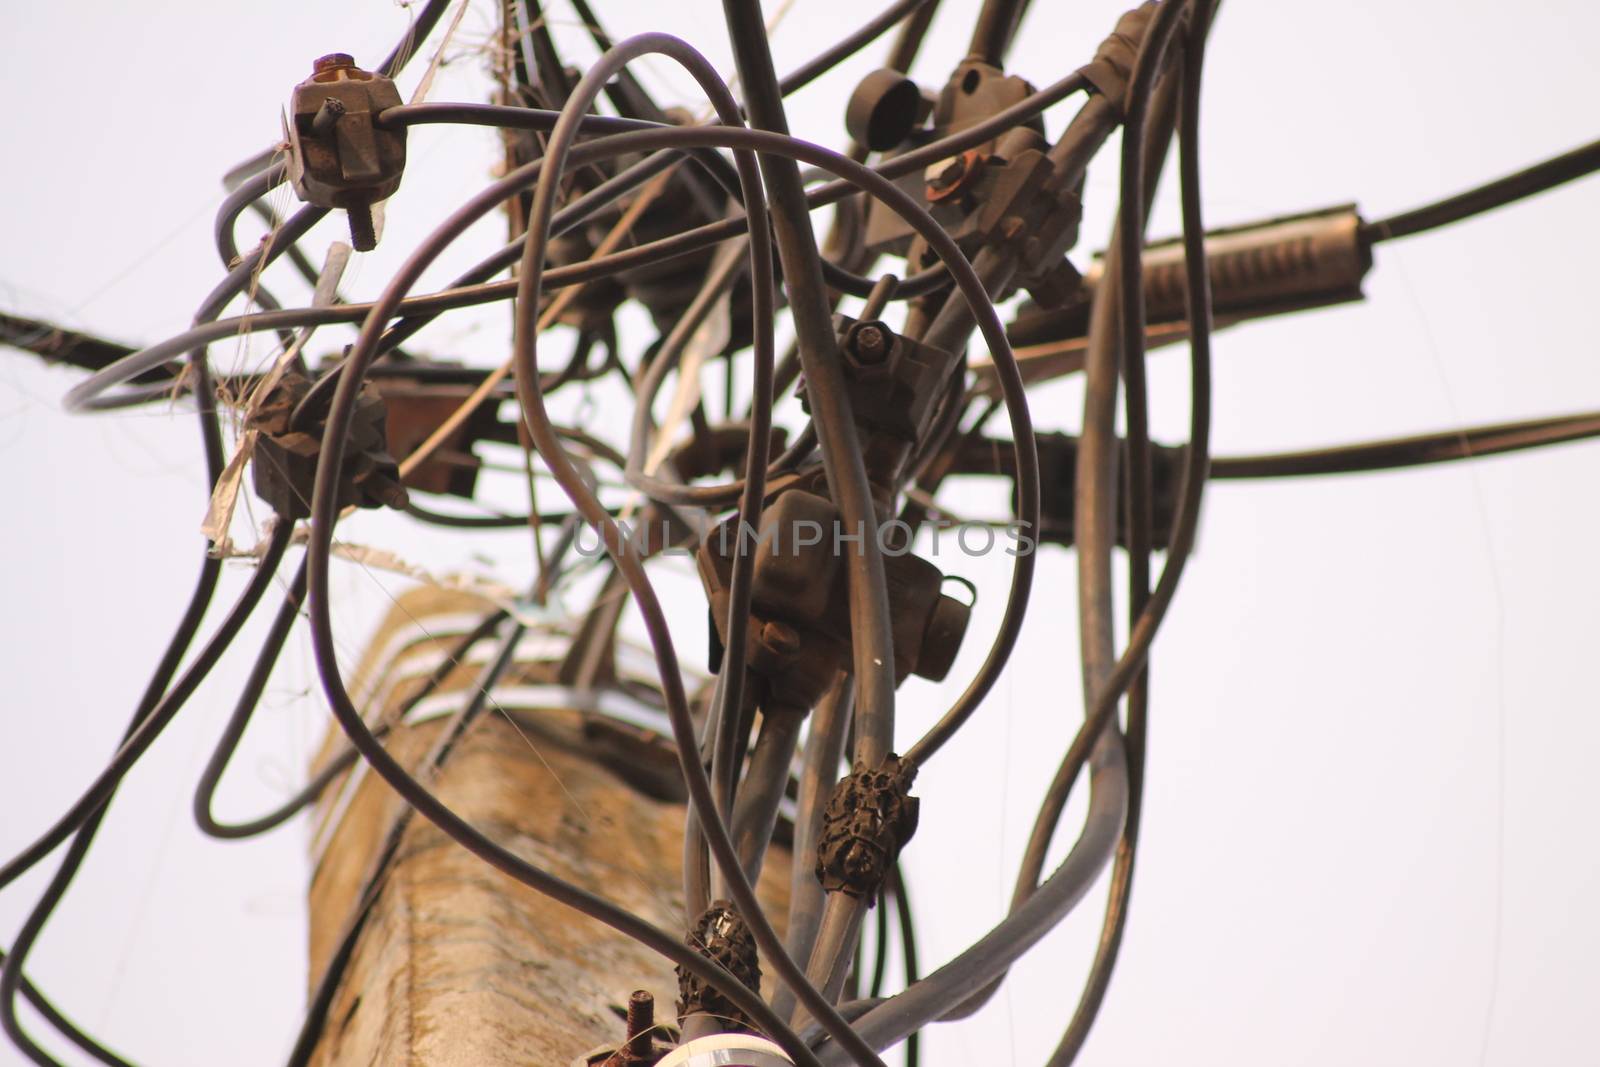 the wires are twisted on electric poles by imagifa